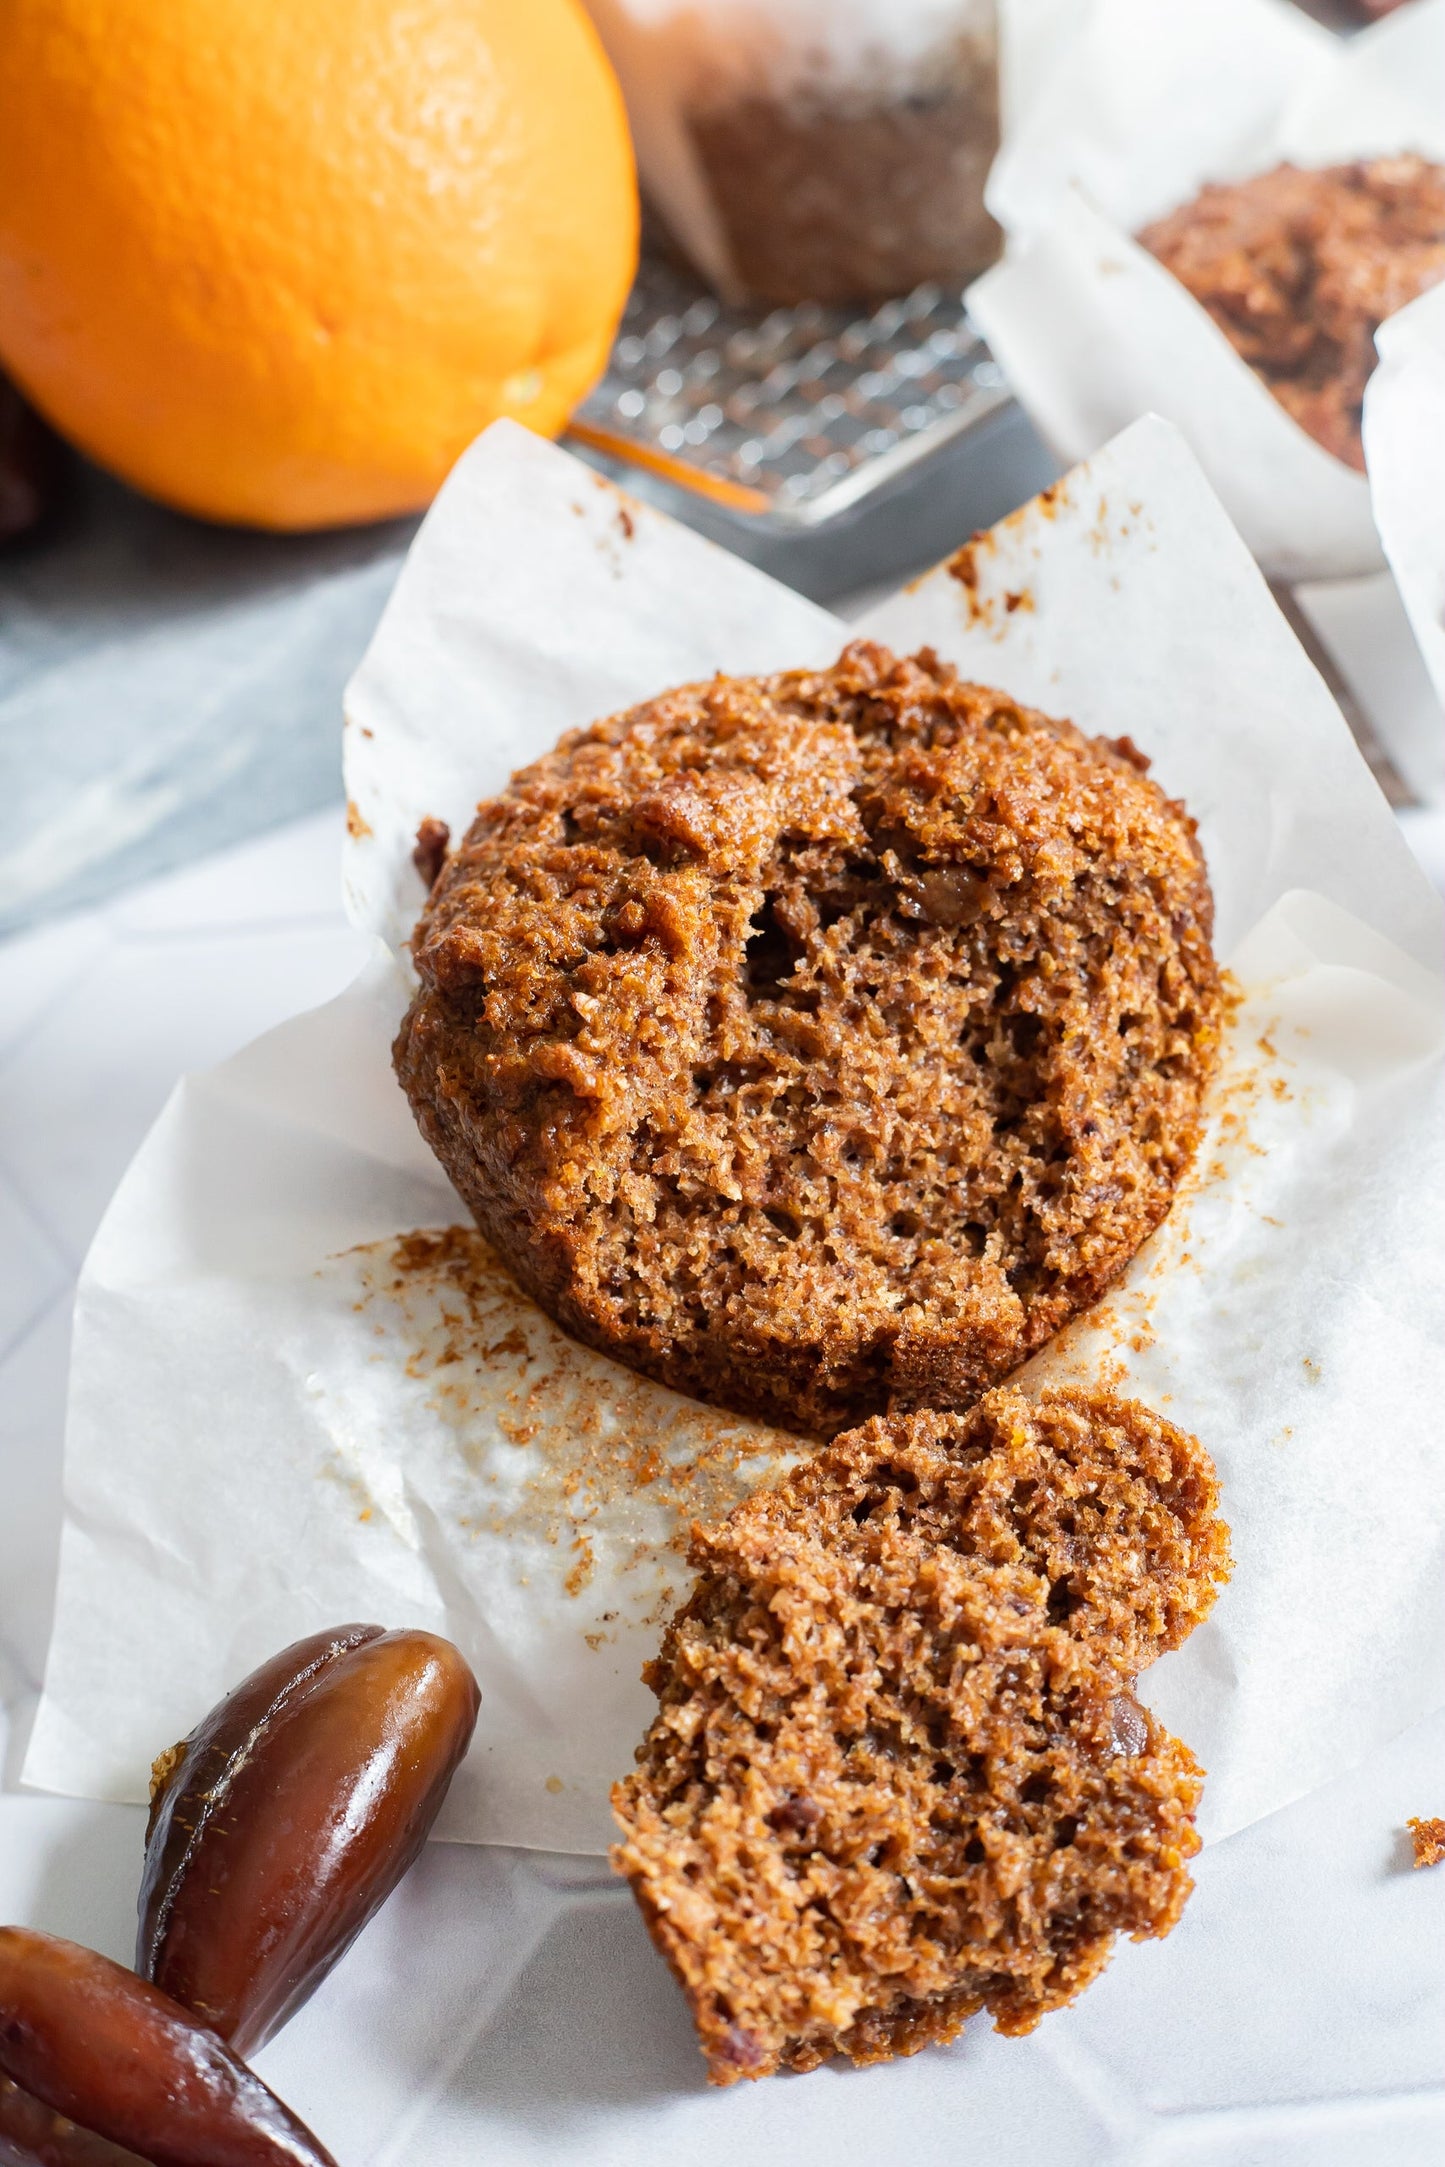 Mary's Bran Muffin with orange and dates